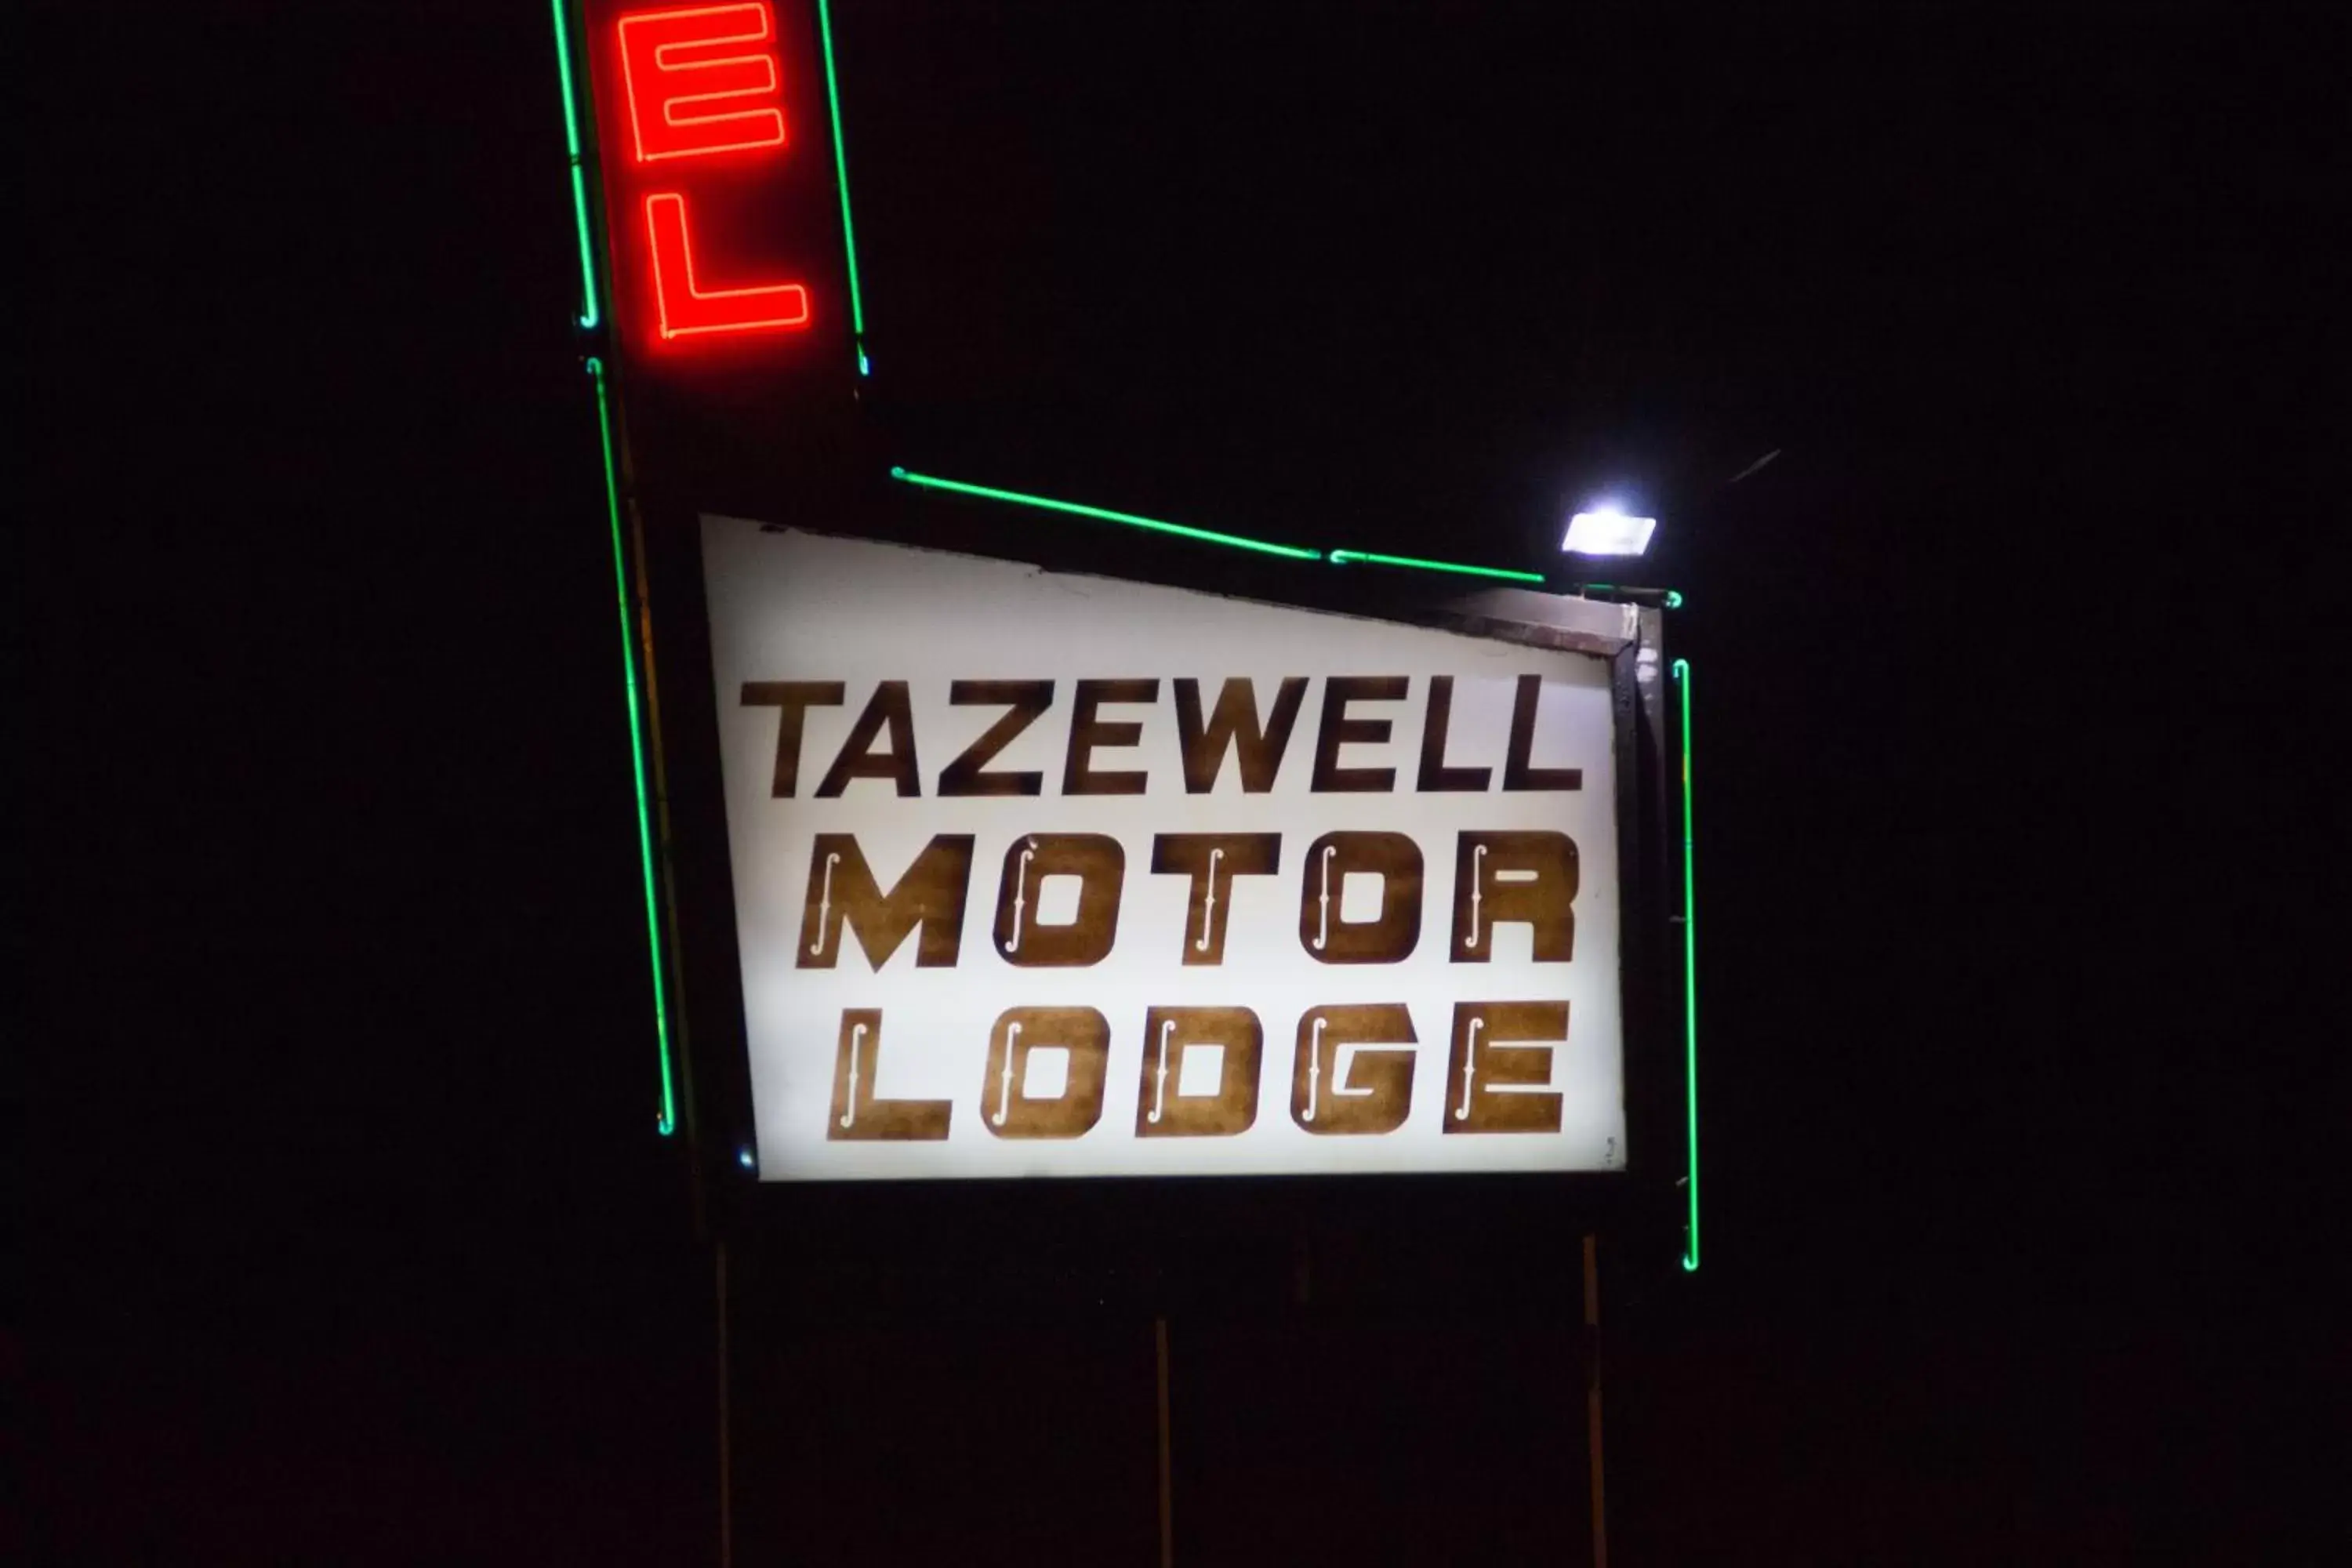 Property building in Tazewell Motor Lodge